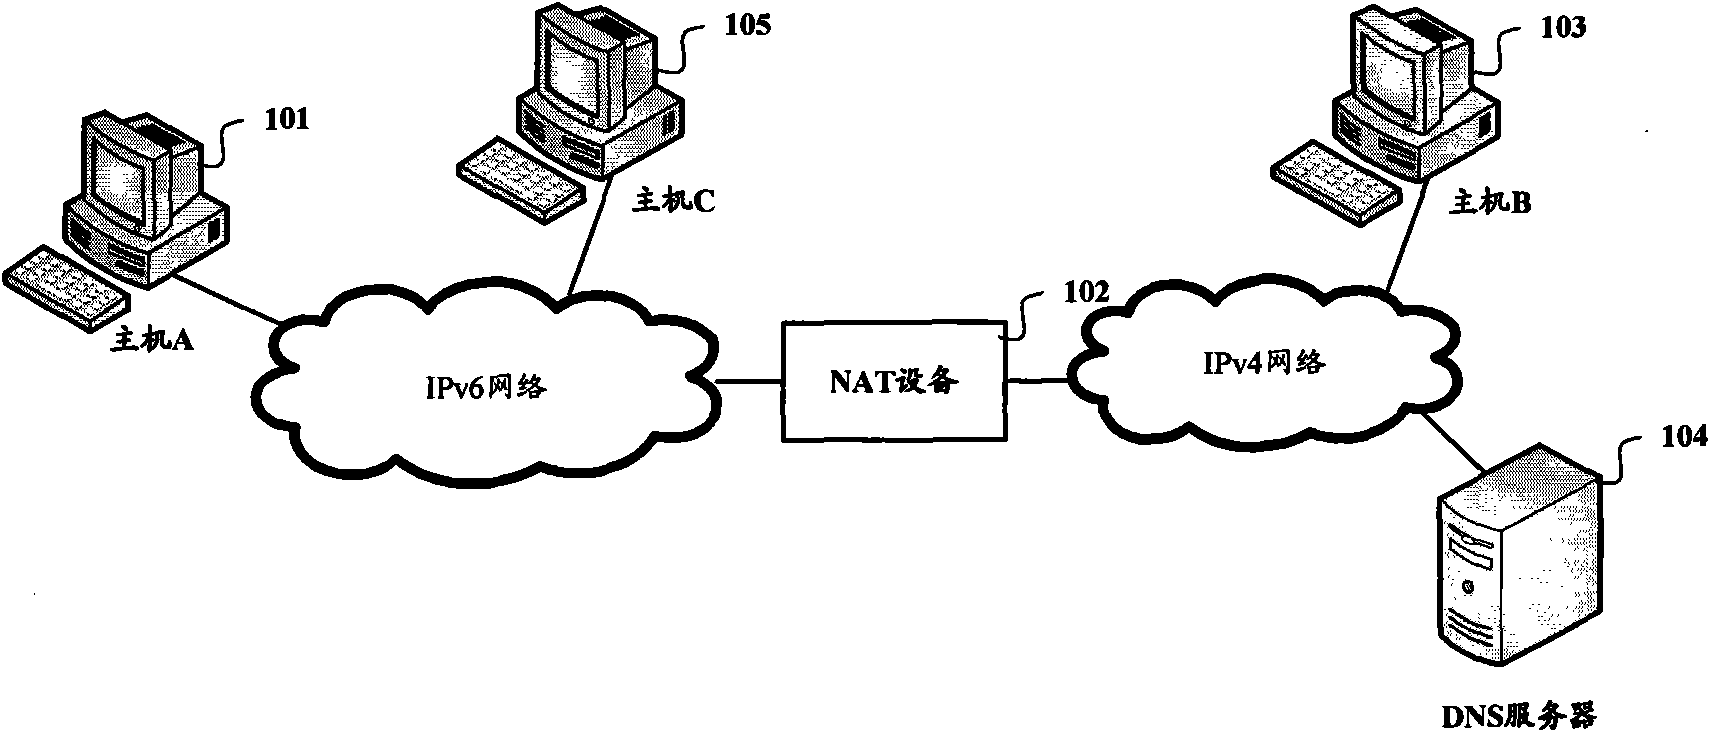 Method and system for host computer with IPv4 application to communicate through IPv6 network